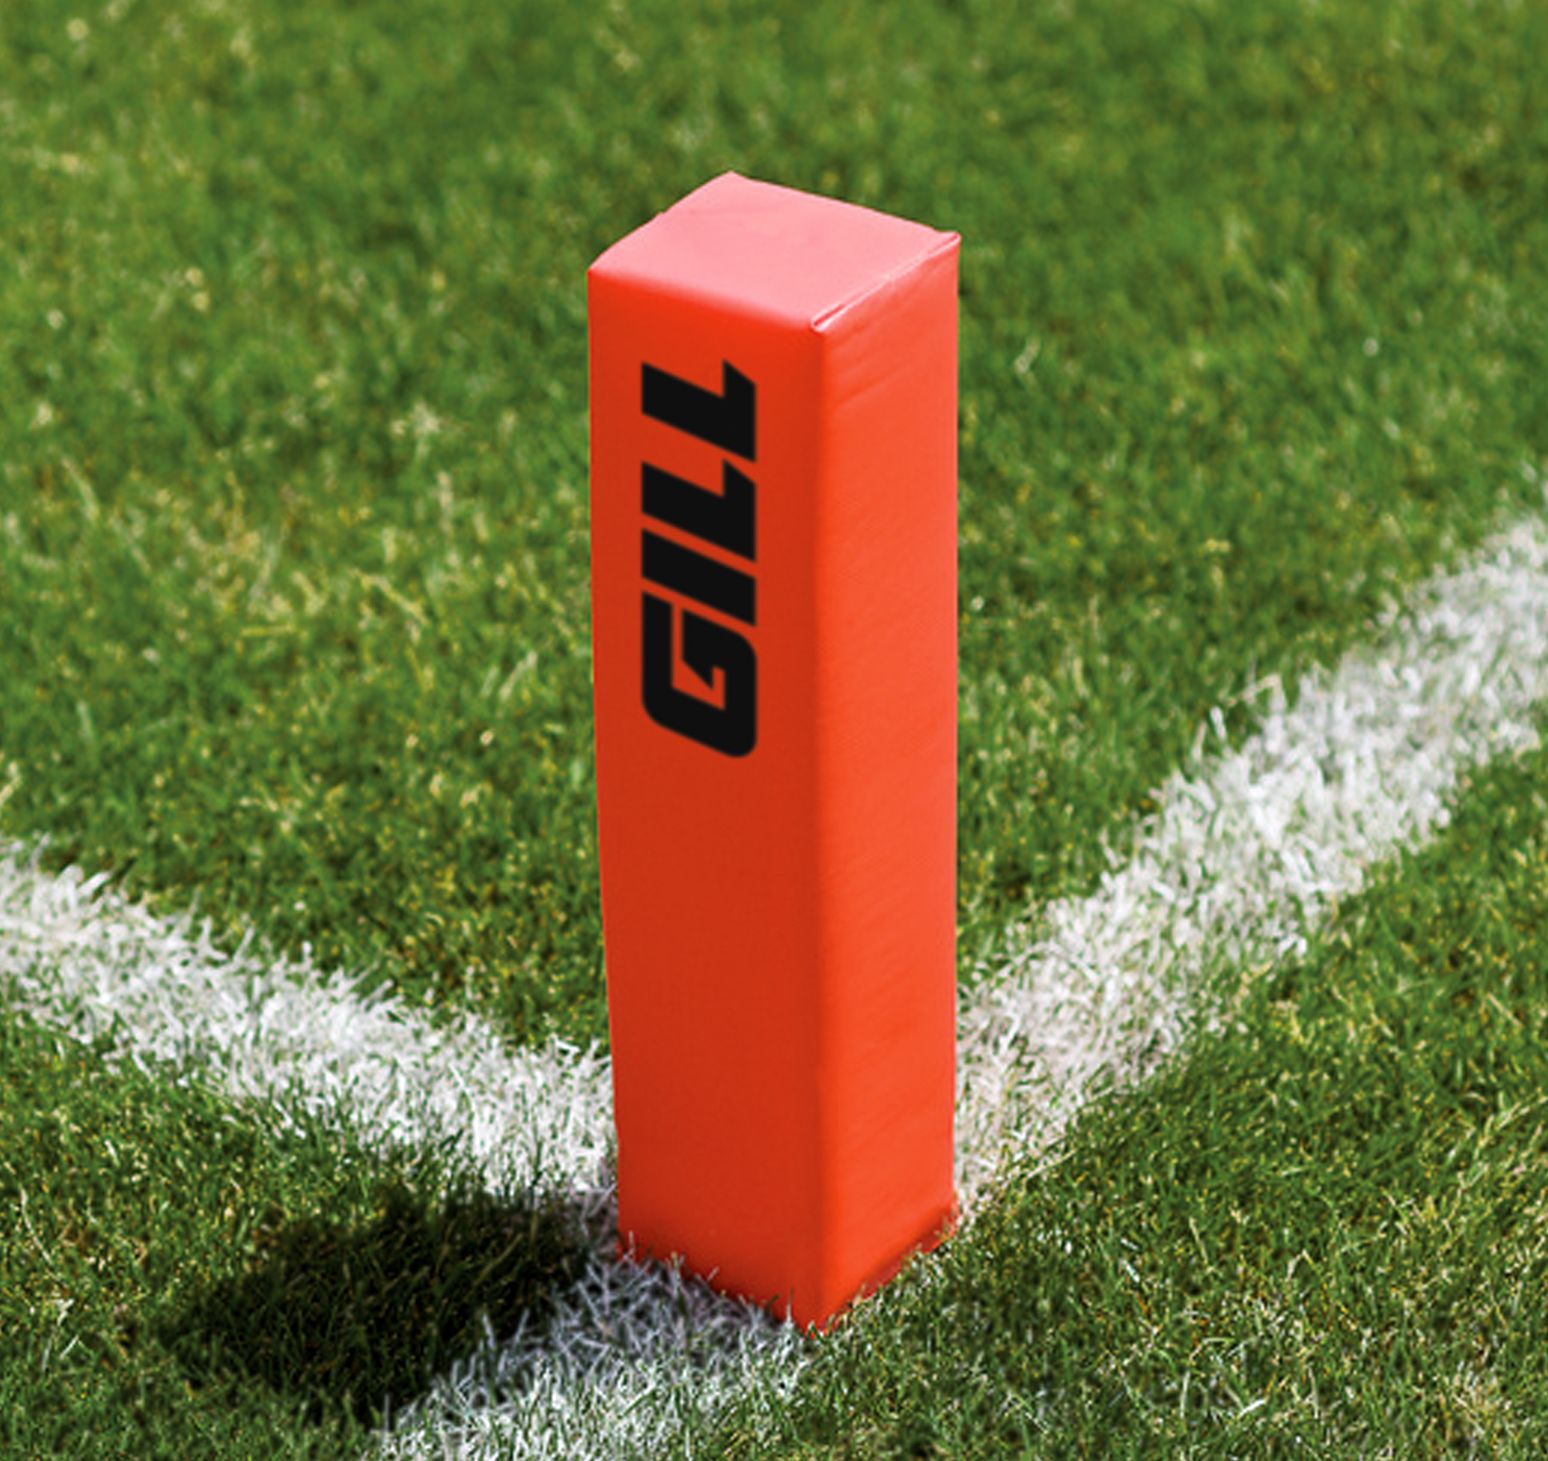 WEIGHTED FOOTBALL PYLONS - (SET OF 4)